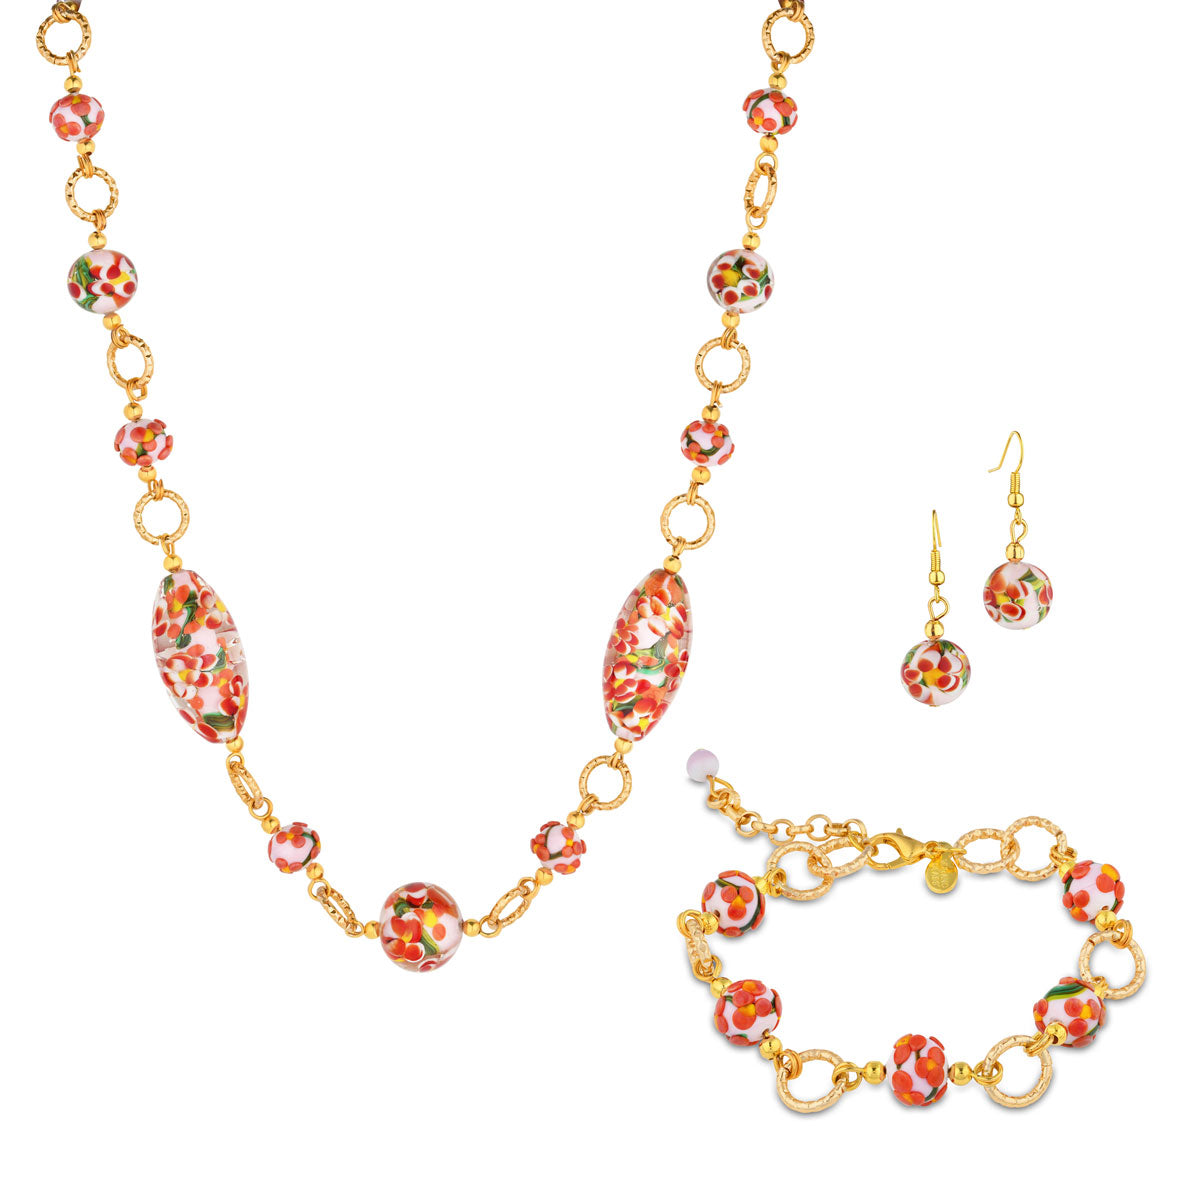 Aurora Murano Necklace, Bracelet and Earrings